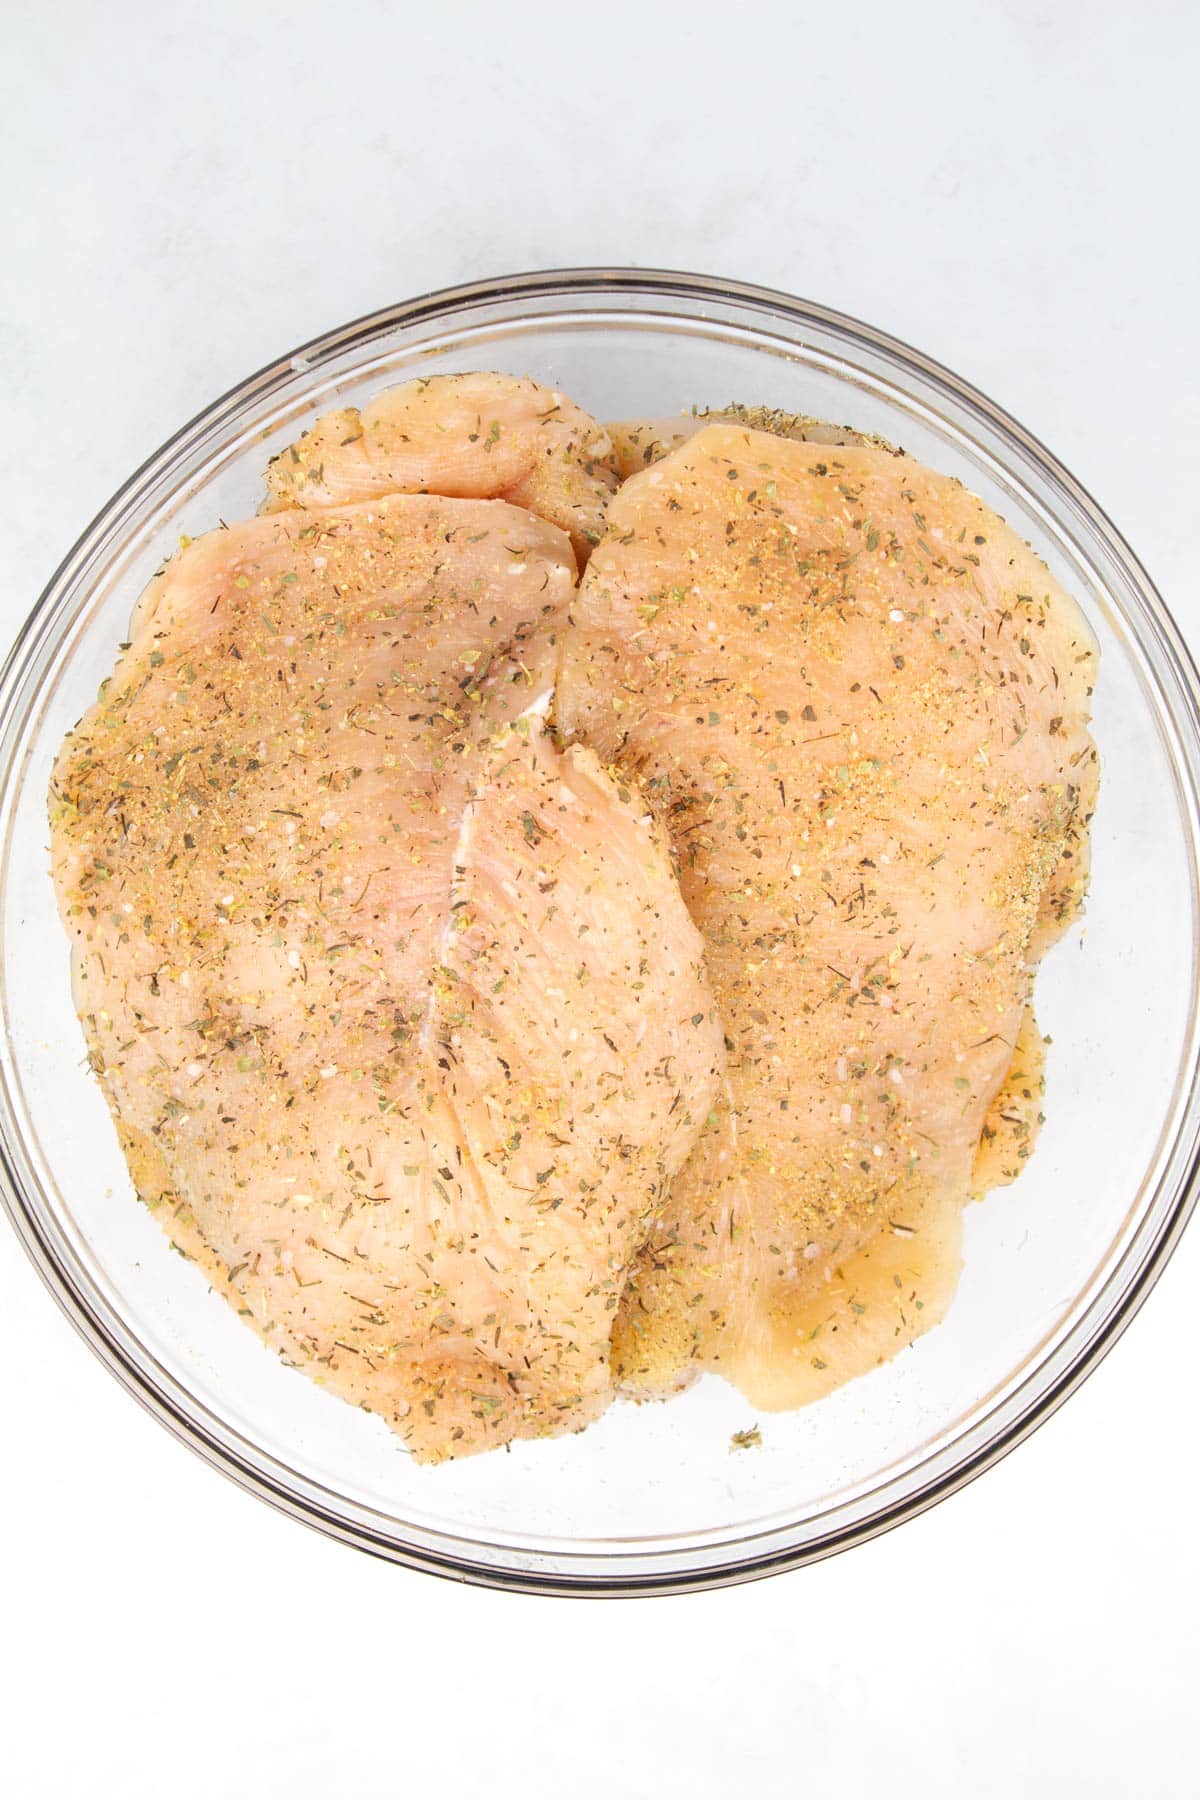 Clear glass bowl with raw chicken breasts sprinkled with seasonings.